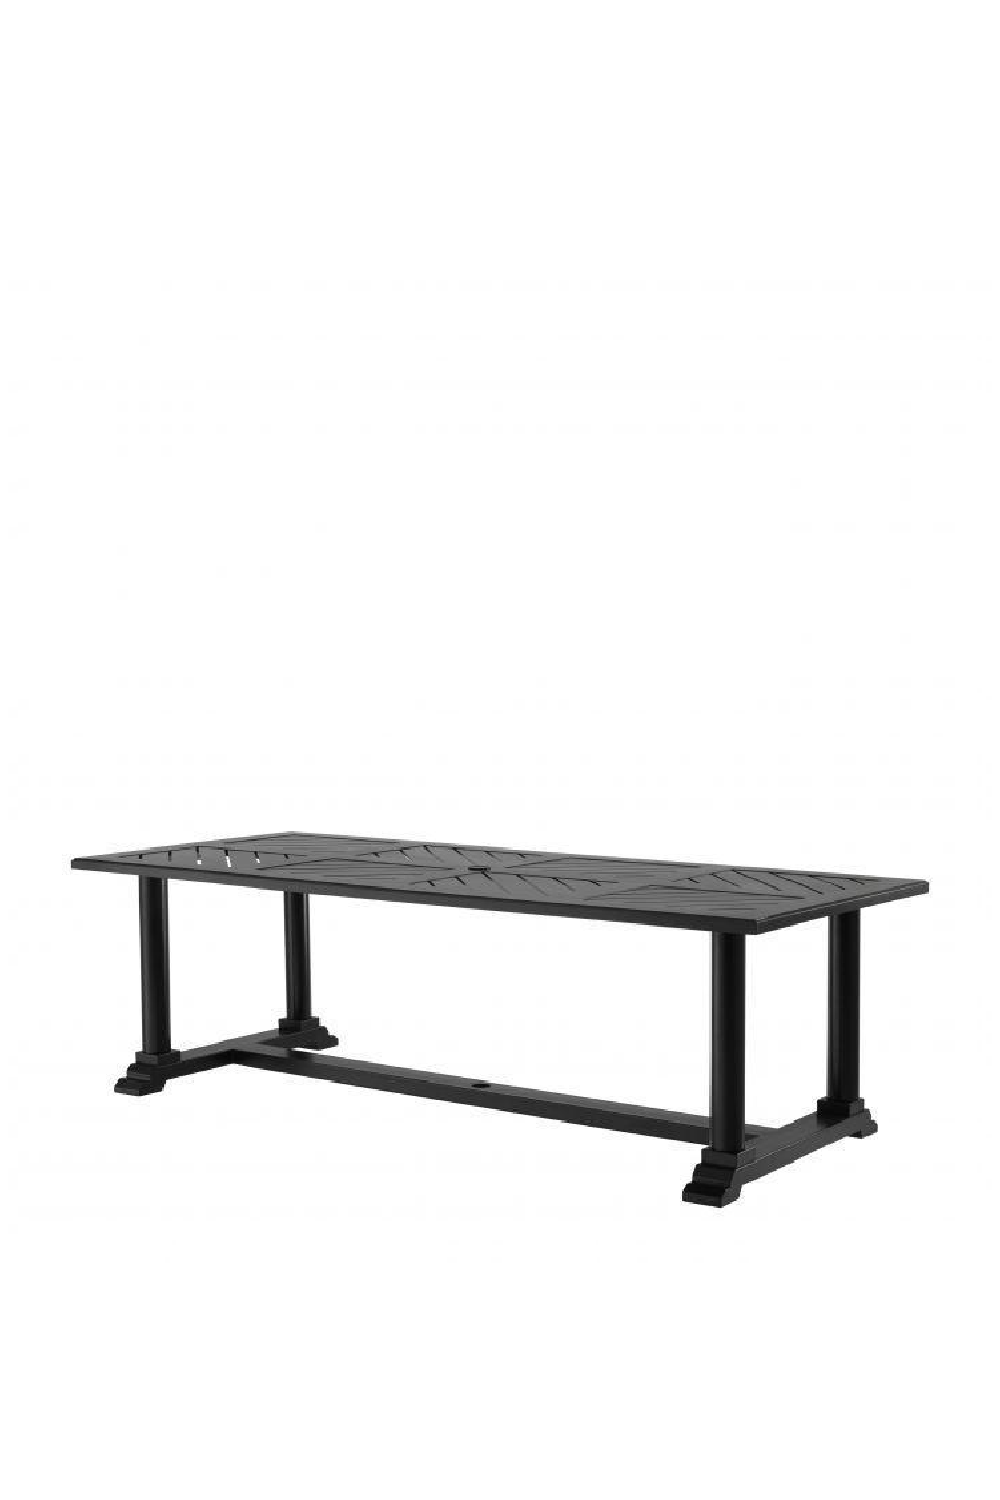 Black Outdoor Dining Table | Eichholtz Bell Rive | Oroa.com